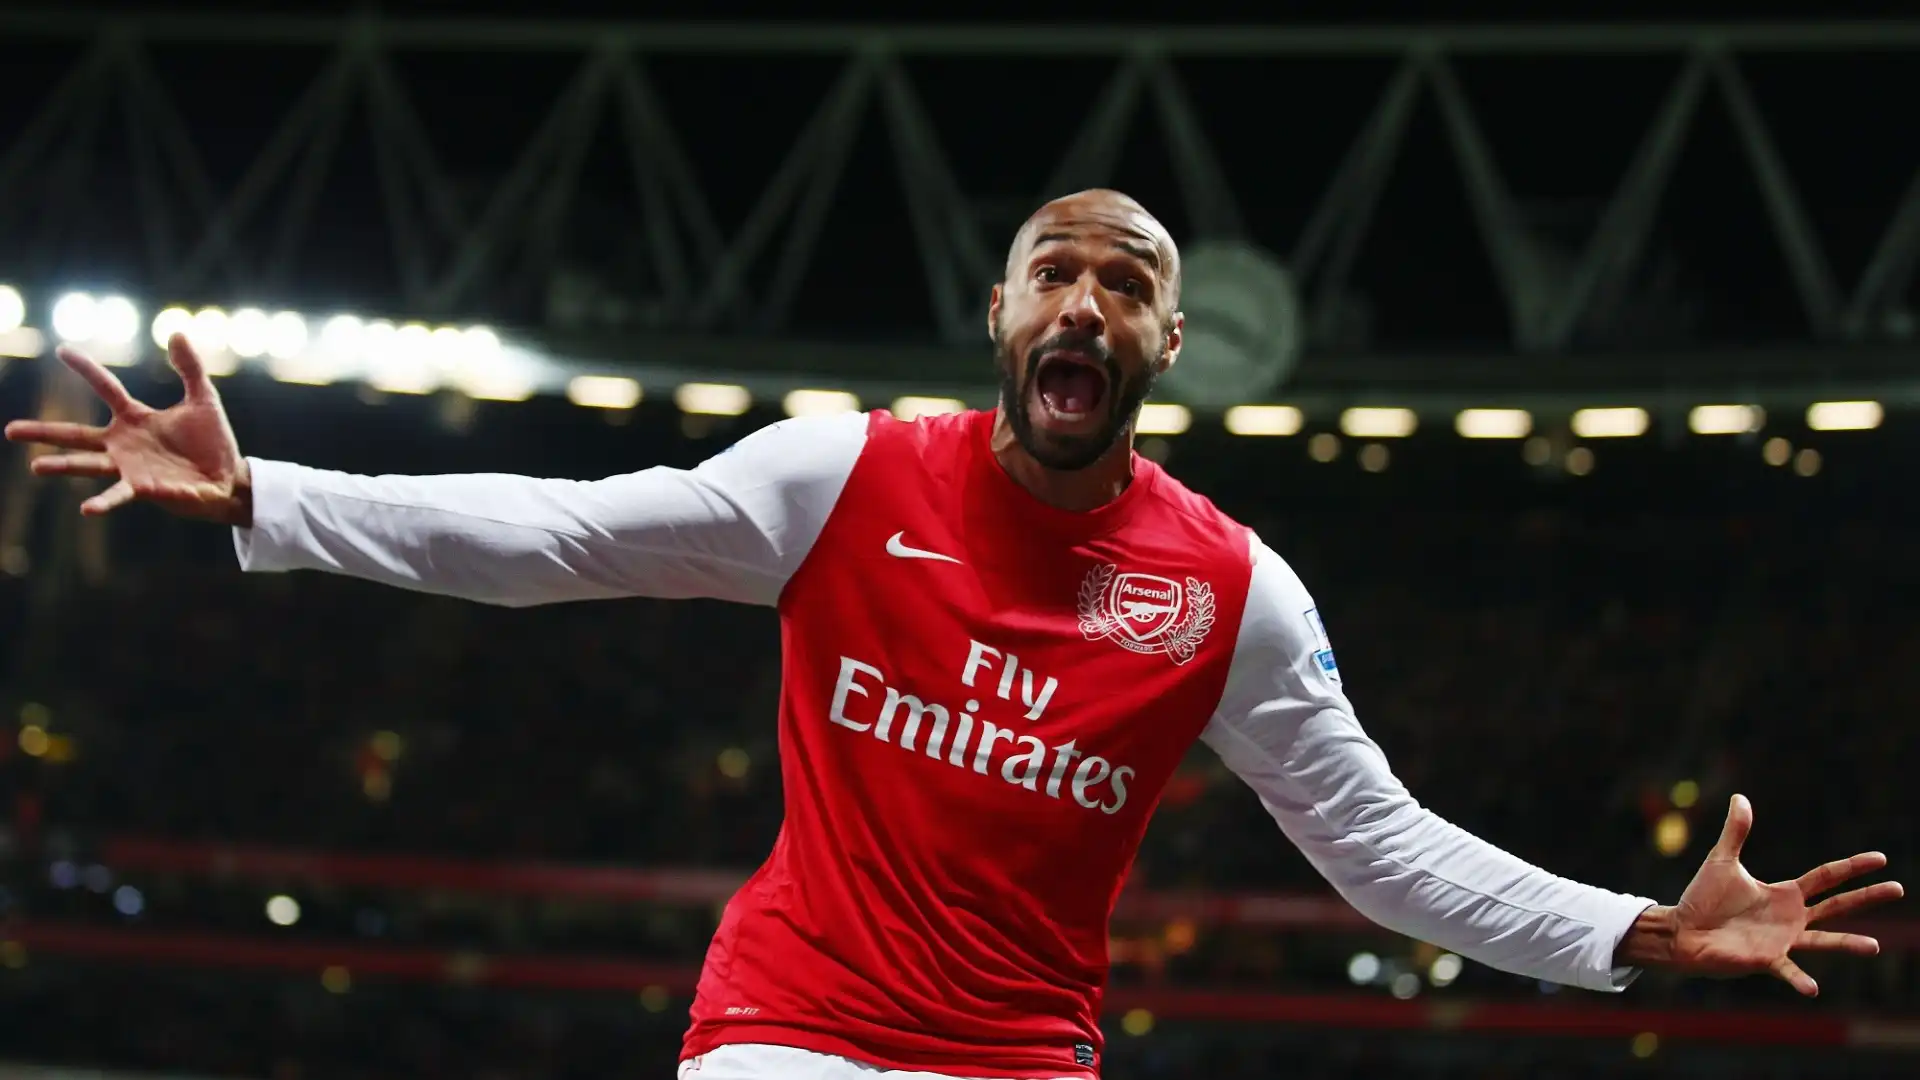 Thierry Henry (Attaccante, Francia): 17 agosto 1977